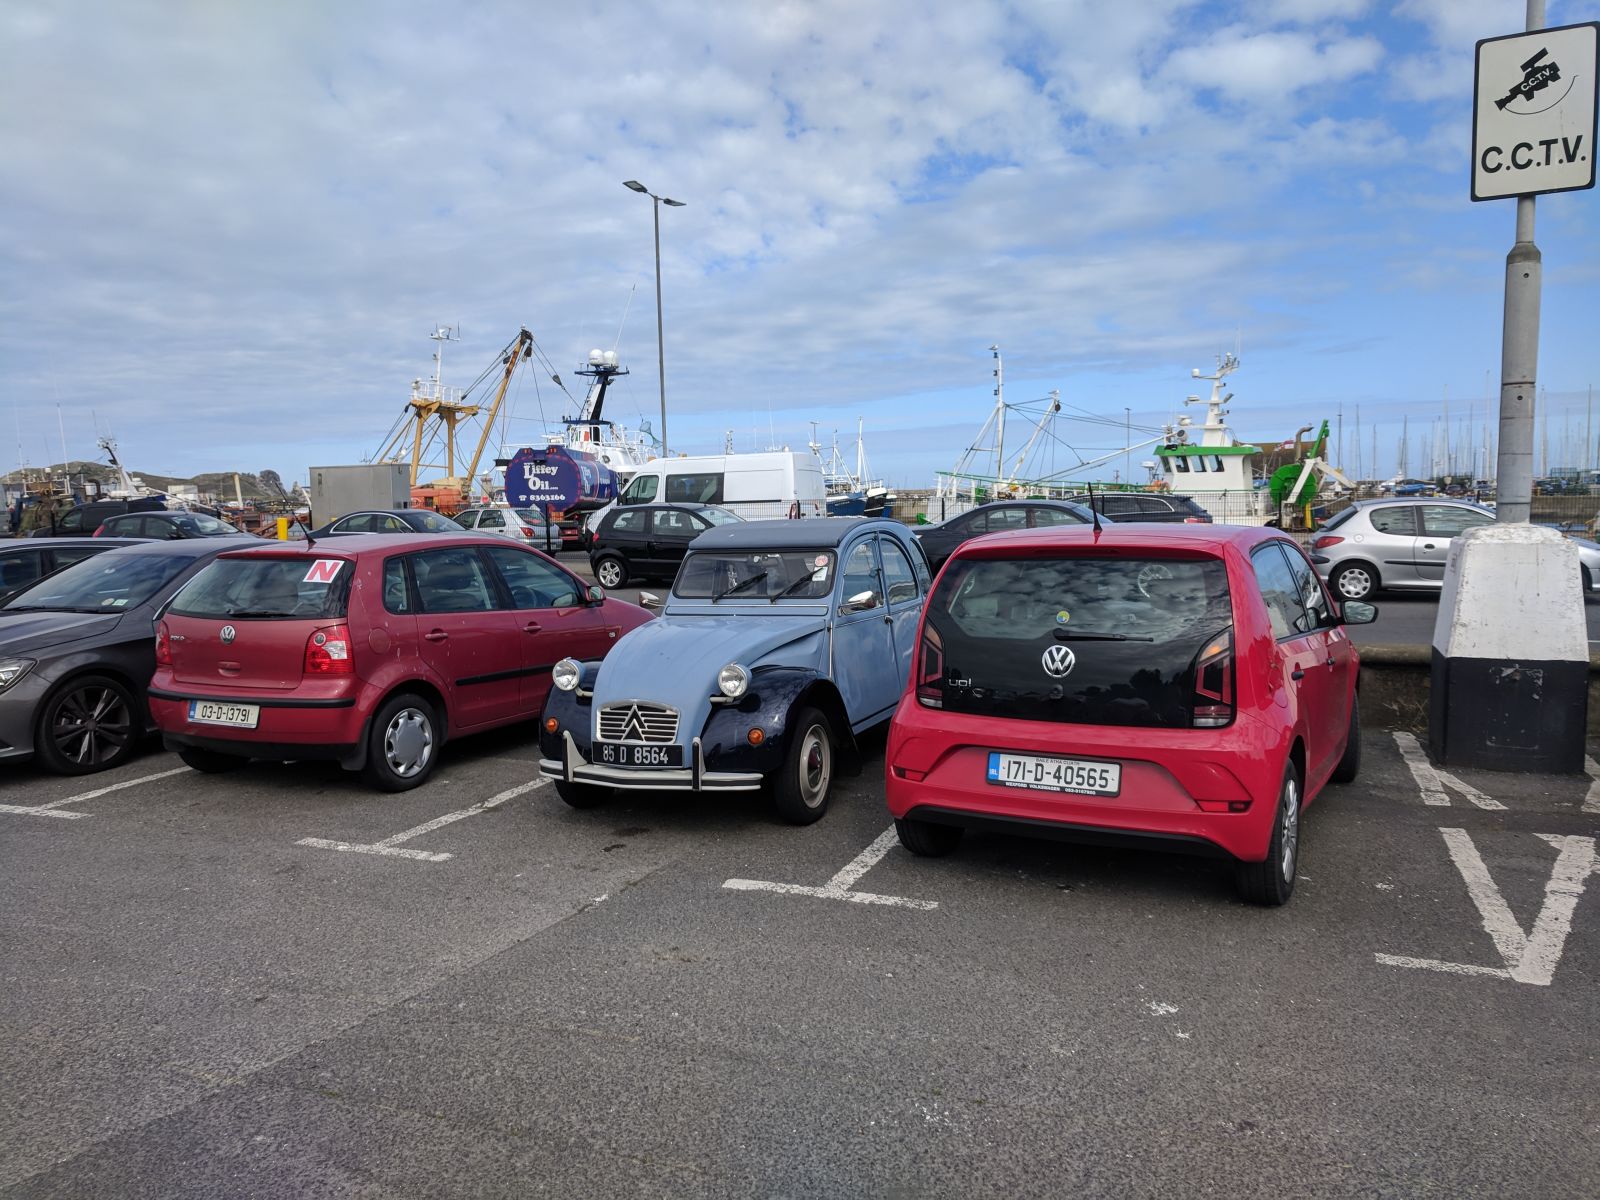 A 2CV and an UP! in a harbor parking lot